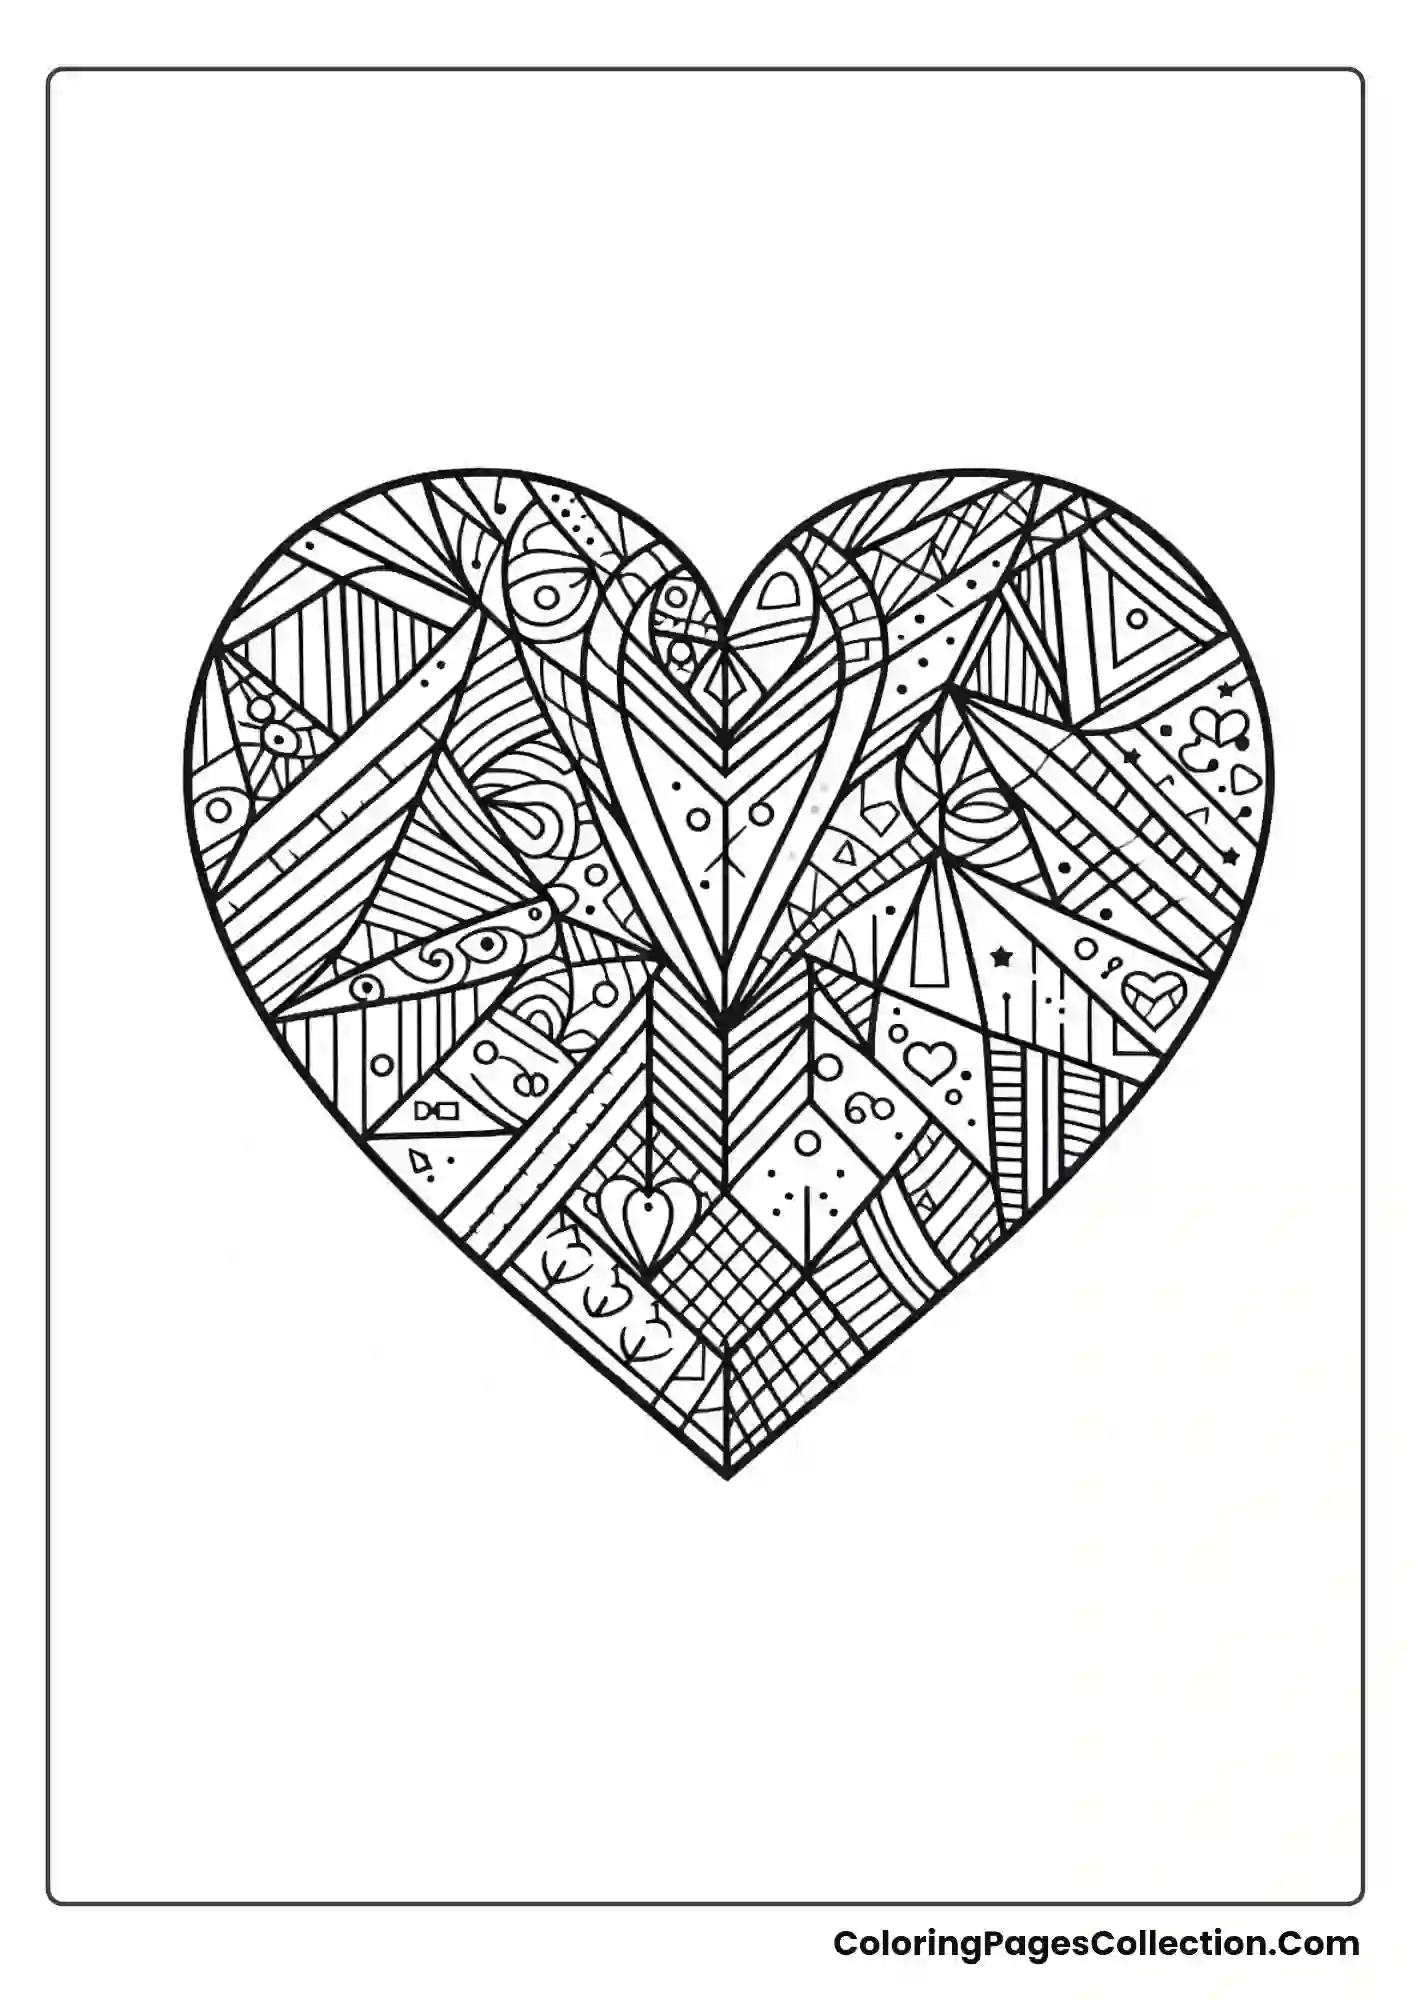 A Heart Made Of Geometric Shapes And Lines